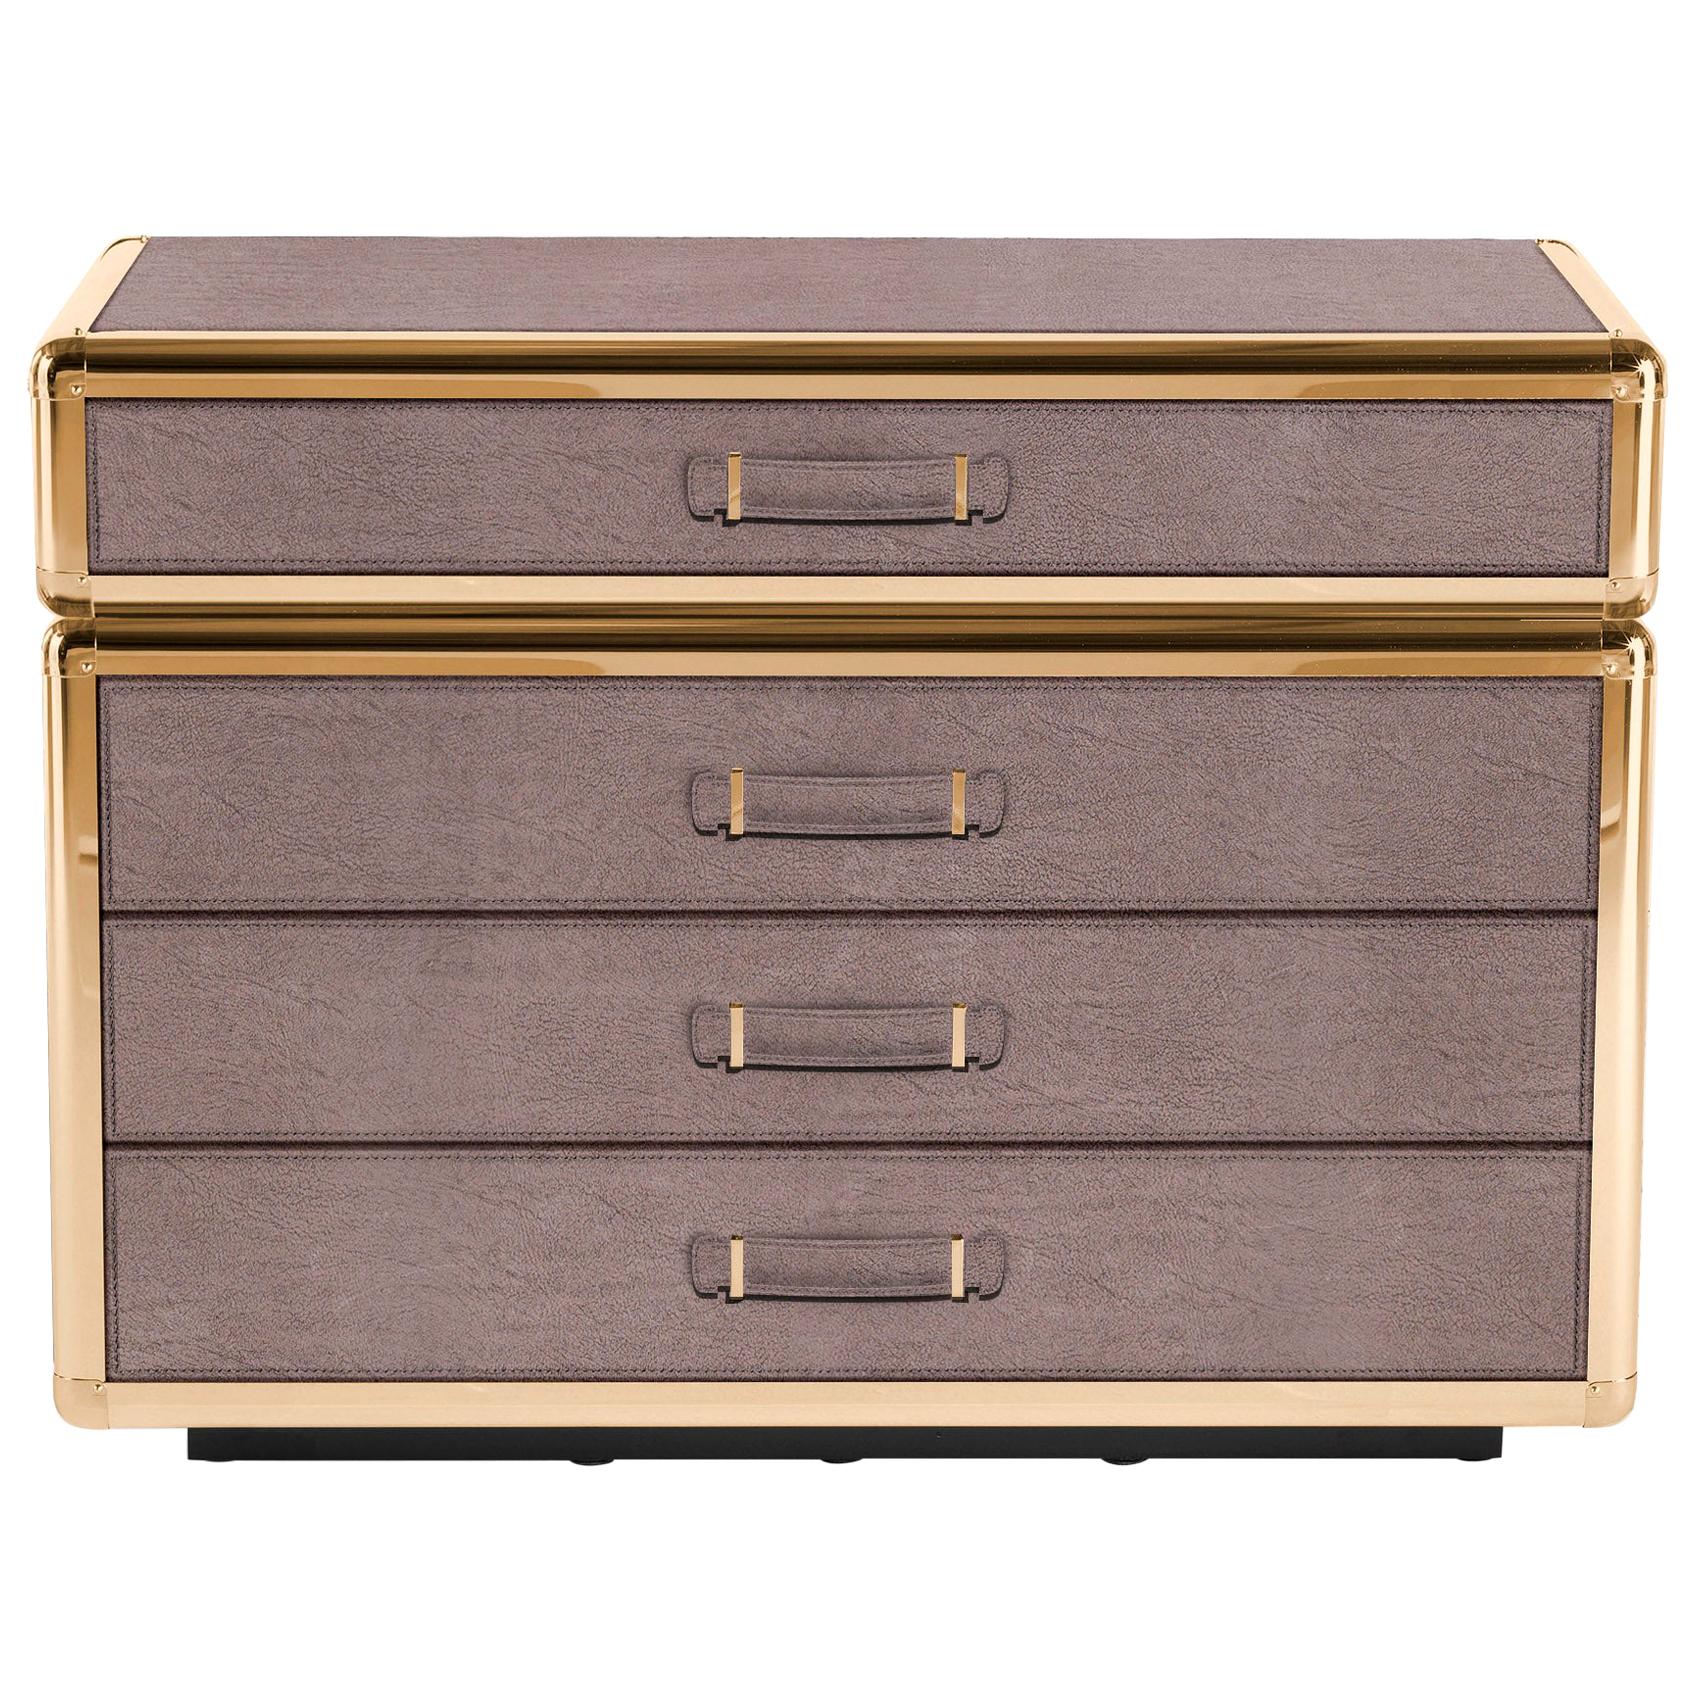 Roberto Cavalli Home Interiors Fly Case Chest Of Drawers in Leather